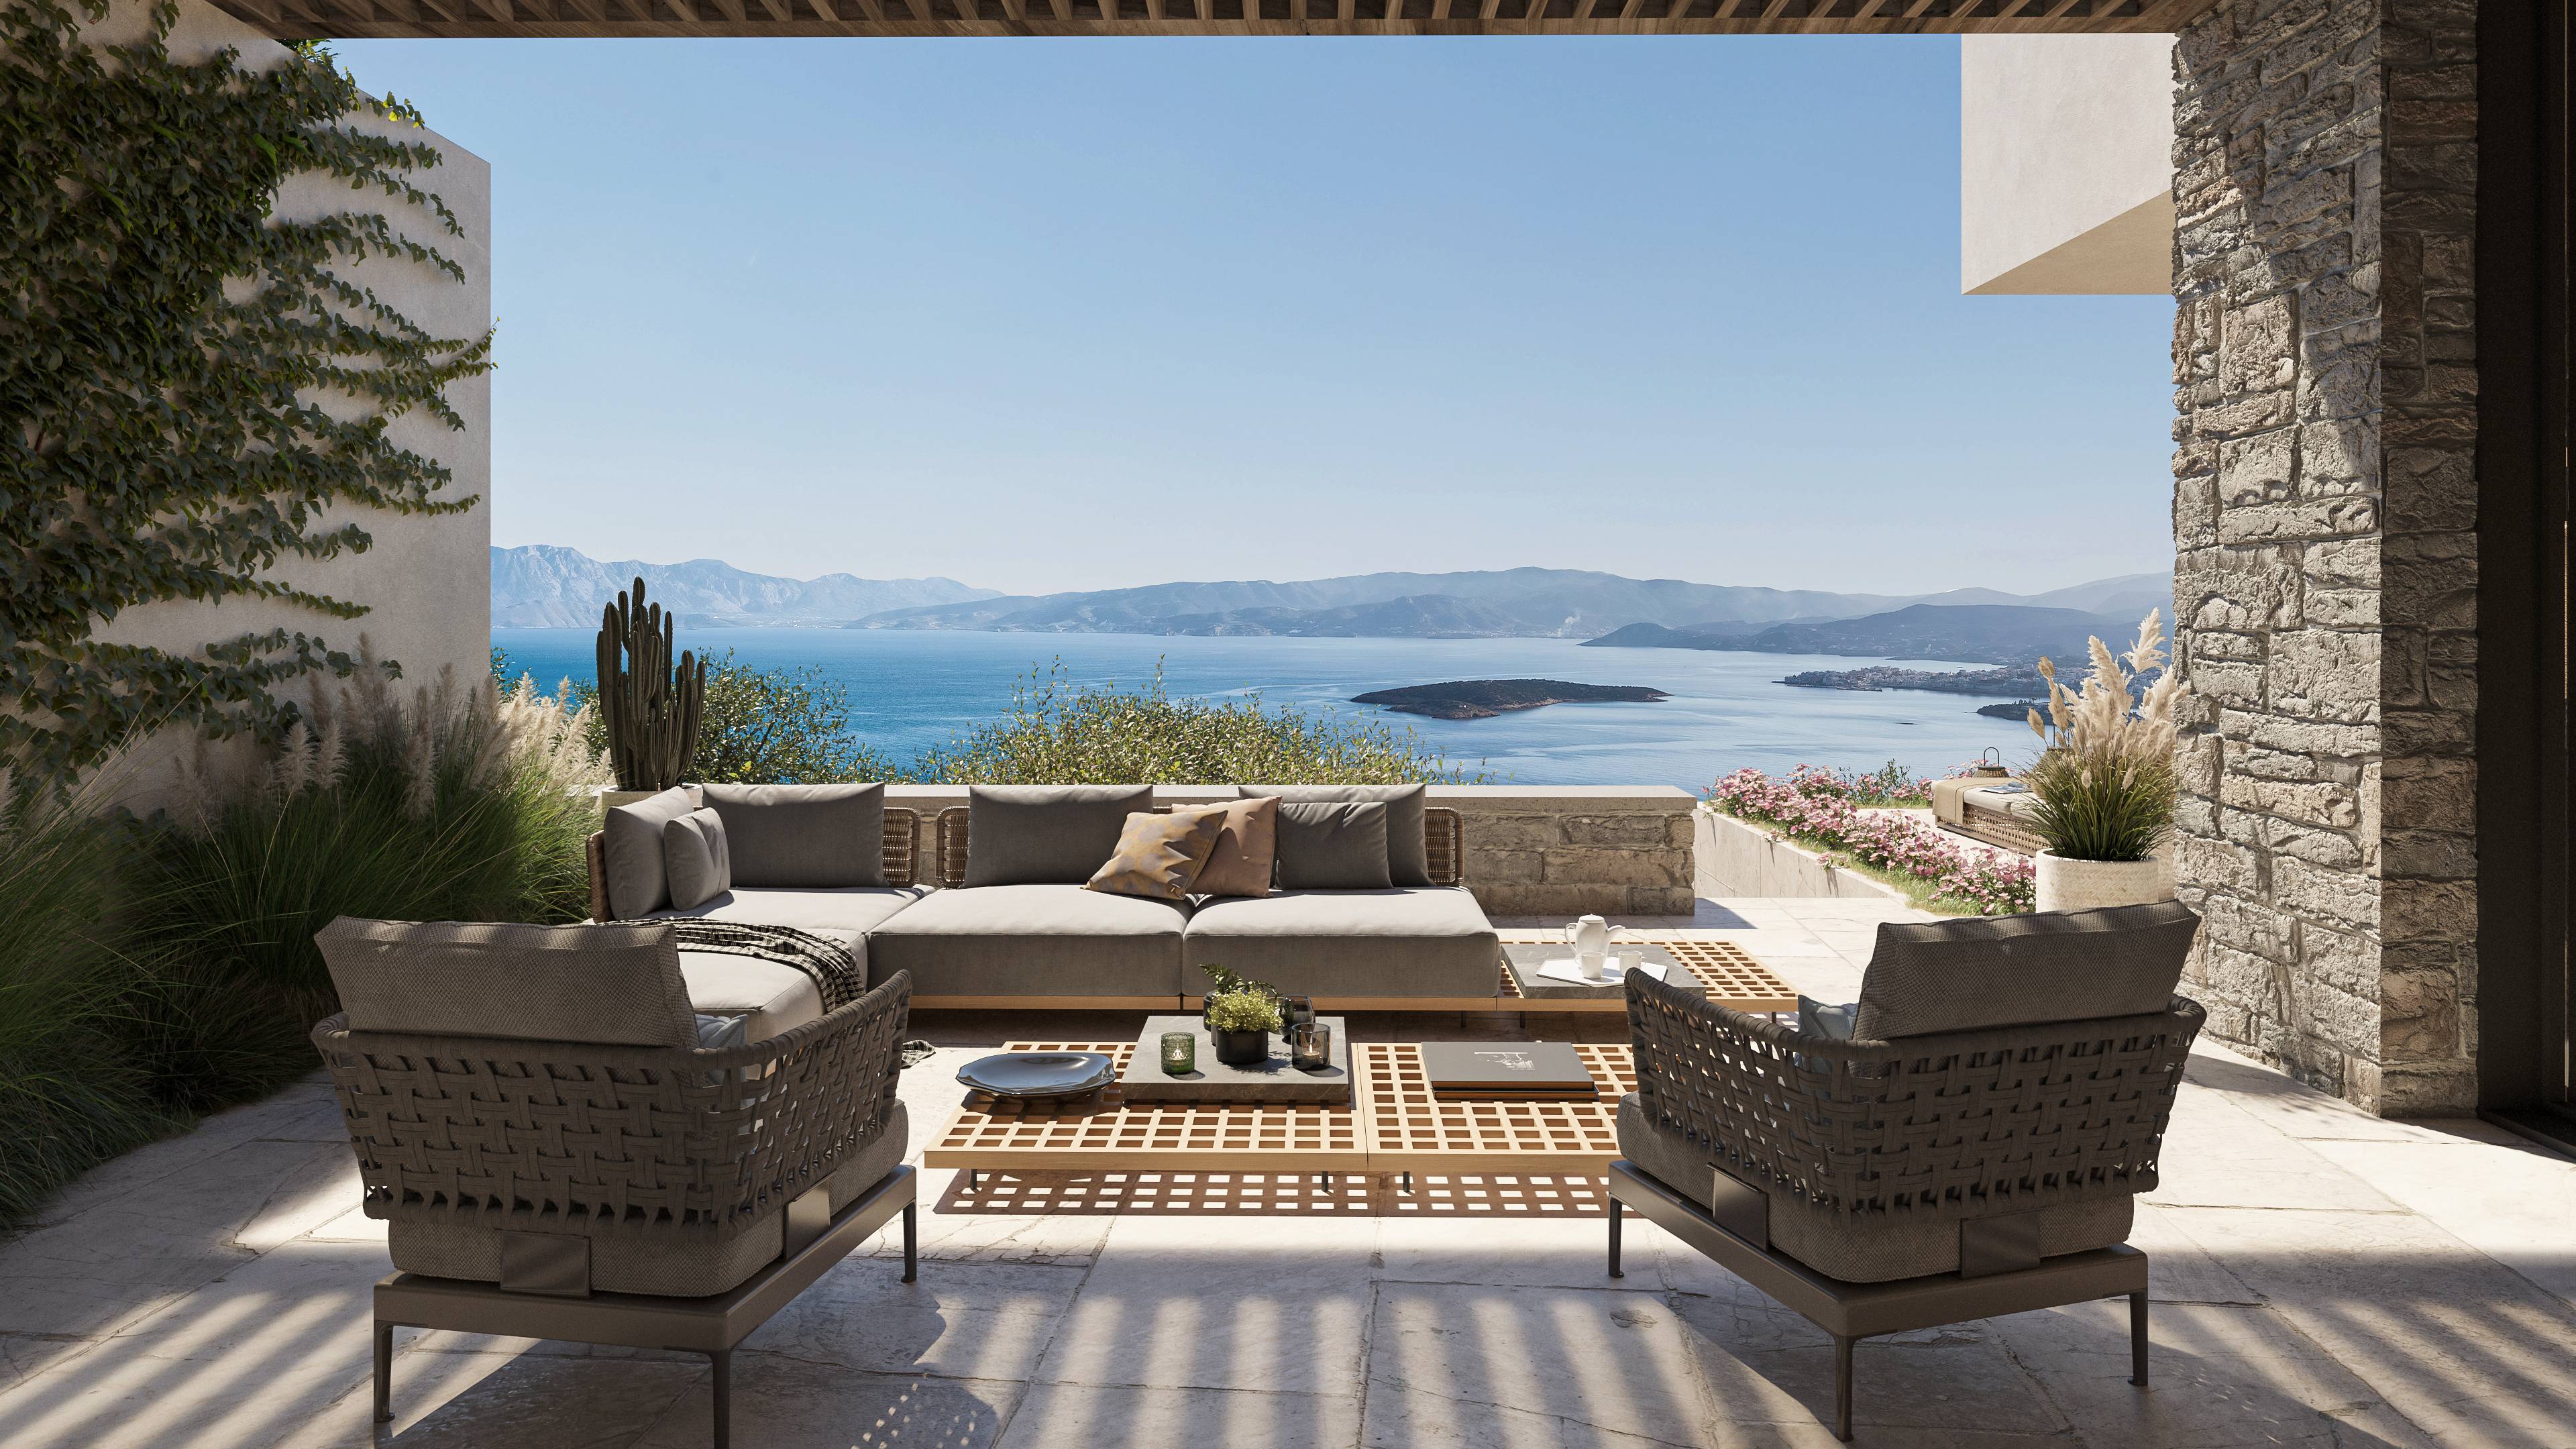 Luxury 4/5-Bedroom Seafront Villa in a Sustainable Private Resort in the Heart of Crete with Maid or Guest Quarters, Infinity-Edge Swimming Pool and Full Sea Views